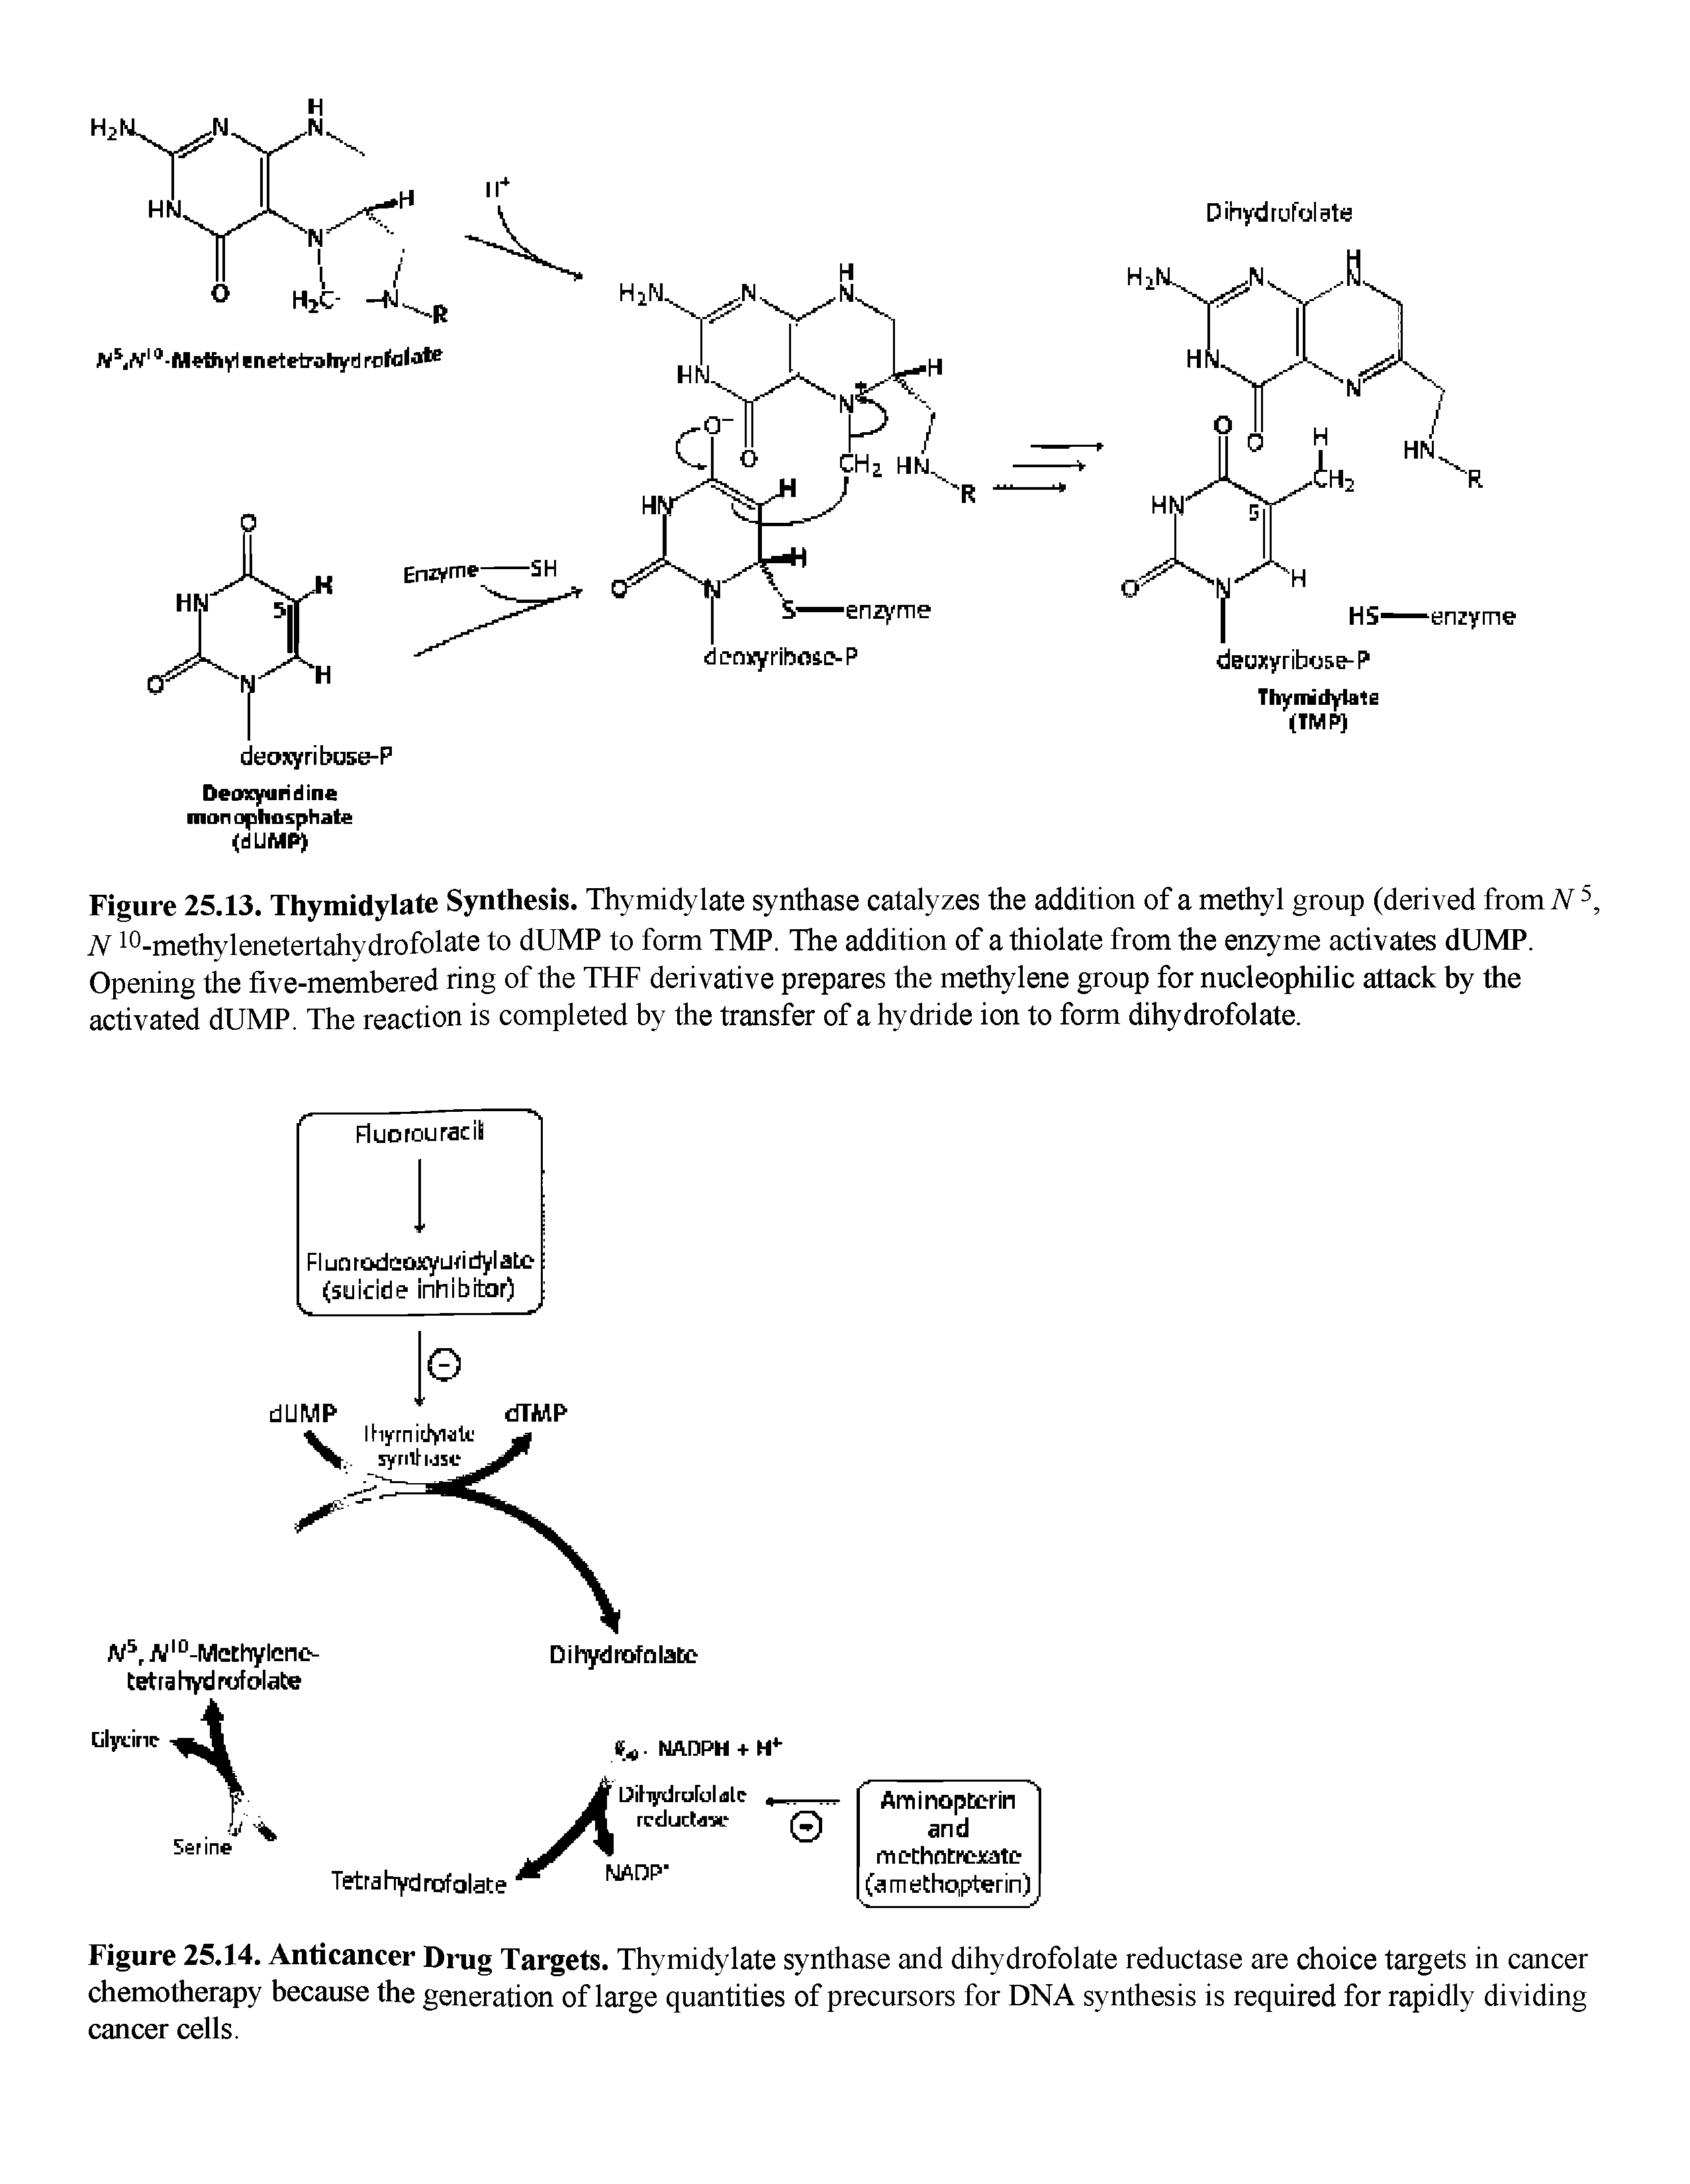 Figure 25.14. Anti cancer Drug Targets. Thymidylate synthase and dihydrofolate reductase are choice targets in cancer chemotherapy because the generation of large quantities of precursors for DNA synthesis is required for rapidly dividing cancer cells.